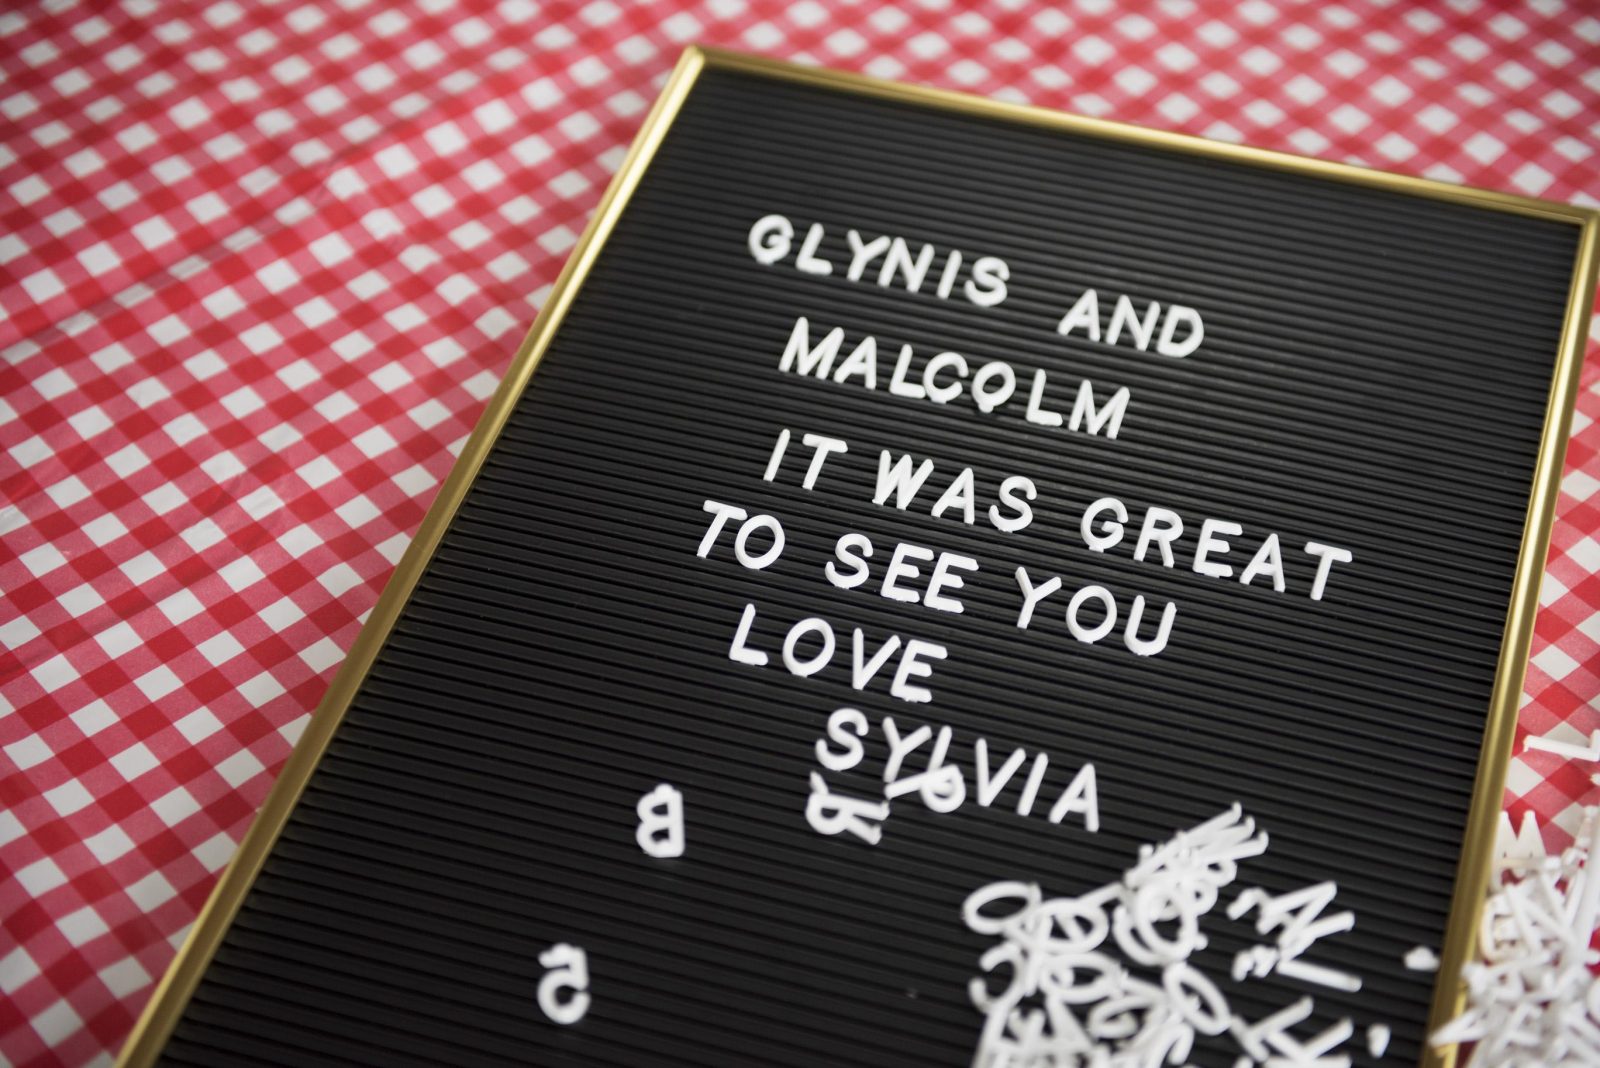 On a red and white checked background a black pin board rests with white letters on. The letters read 'Glynis and Malcolm it was great to see you love sylvia' A jumble of white letters are piled at the bottom of the pin board.